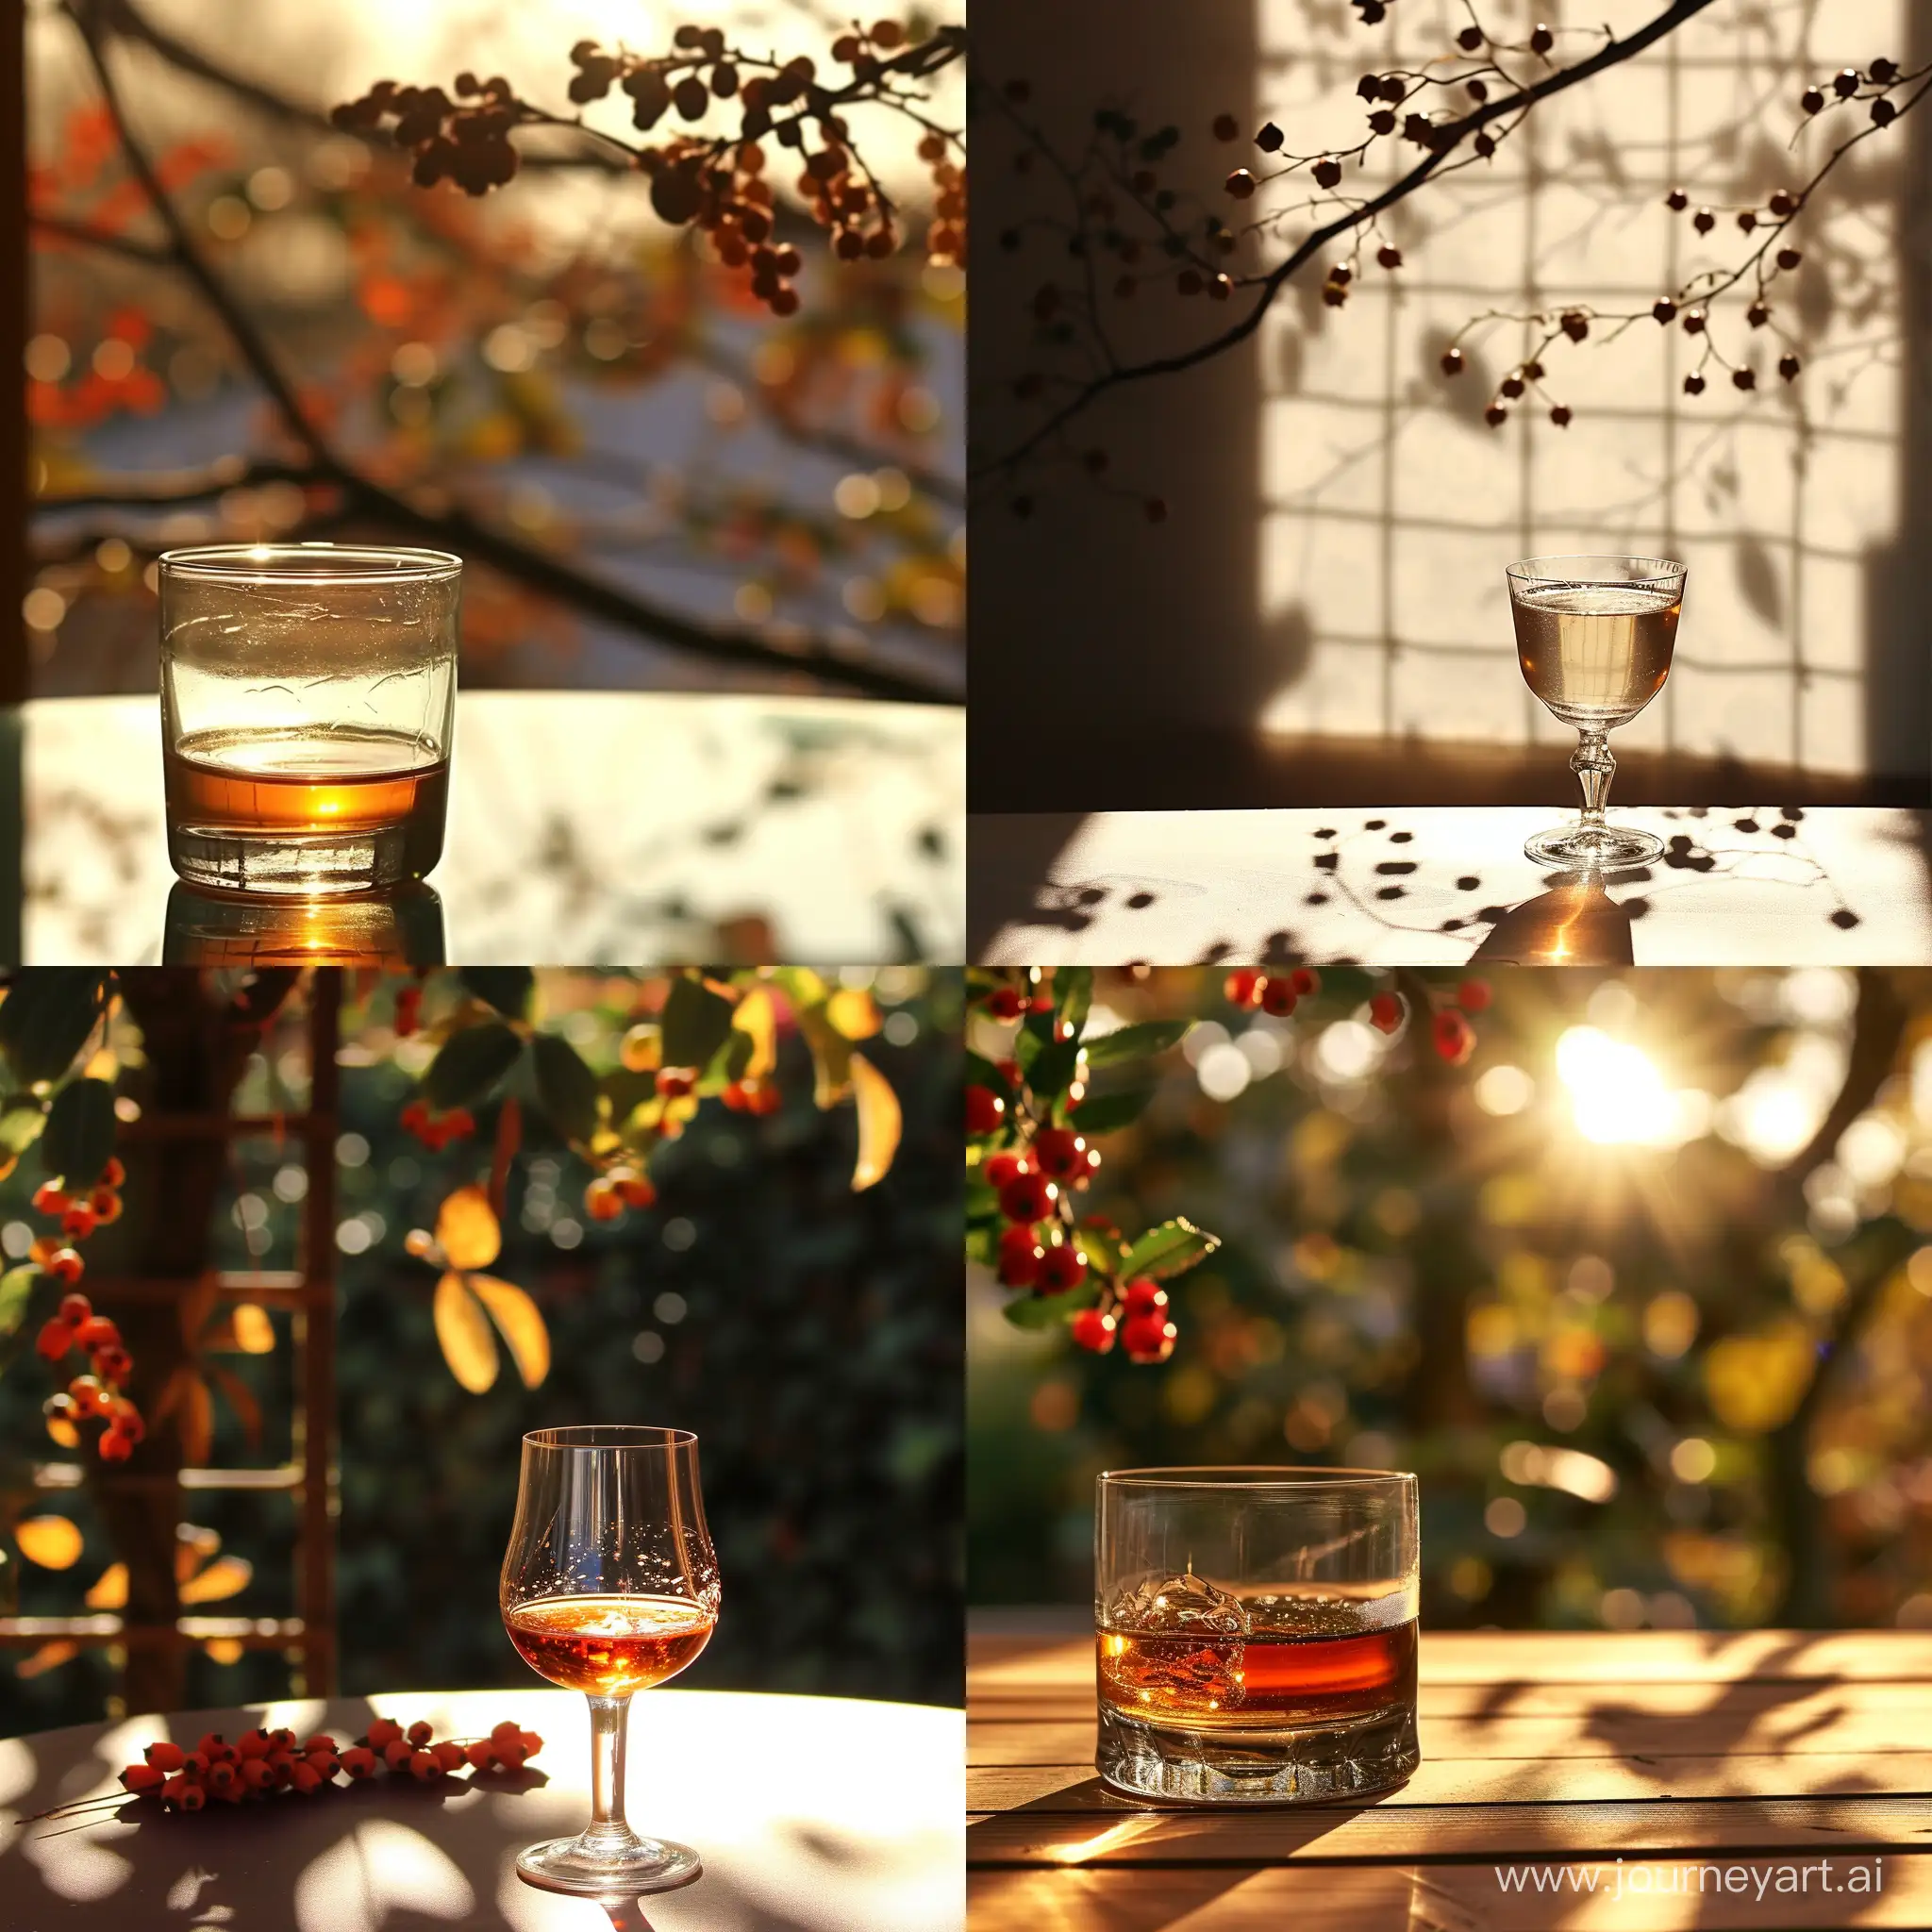 Sunlit-Table-with-Rowan-Grid-and-Refreshing-Drink